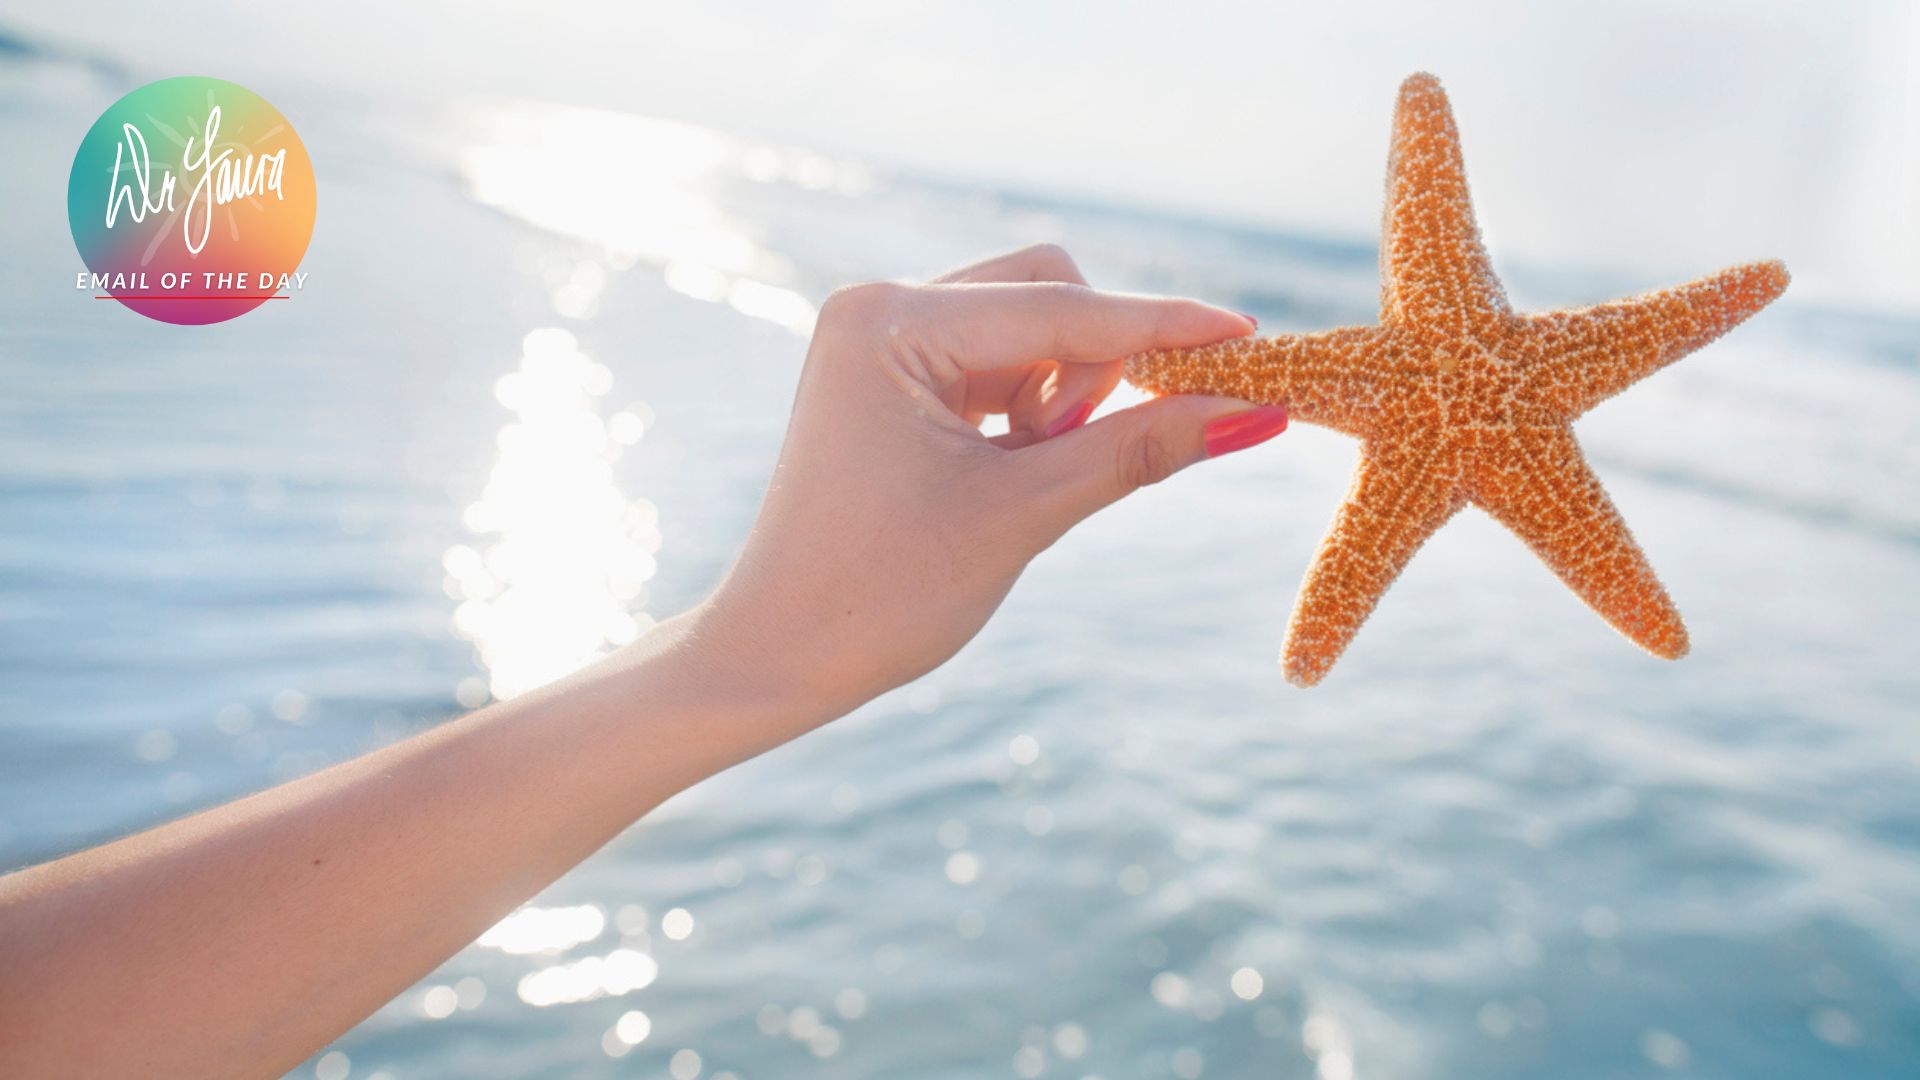 Hand holds up orange starfish against a background of ocean water